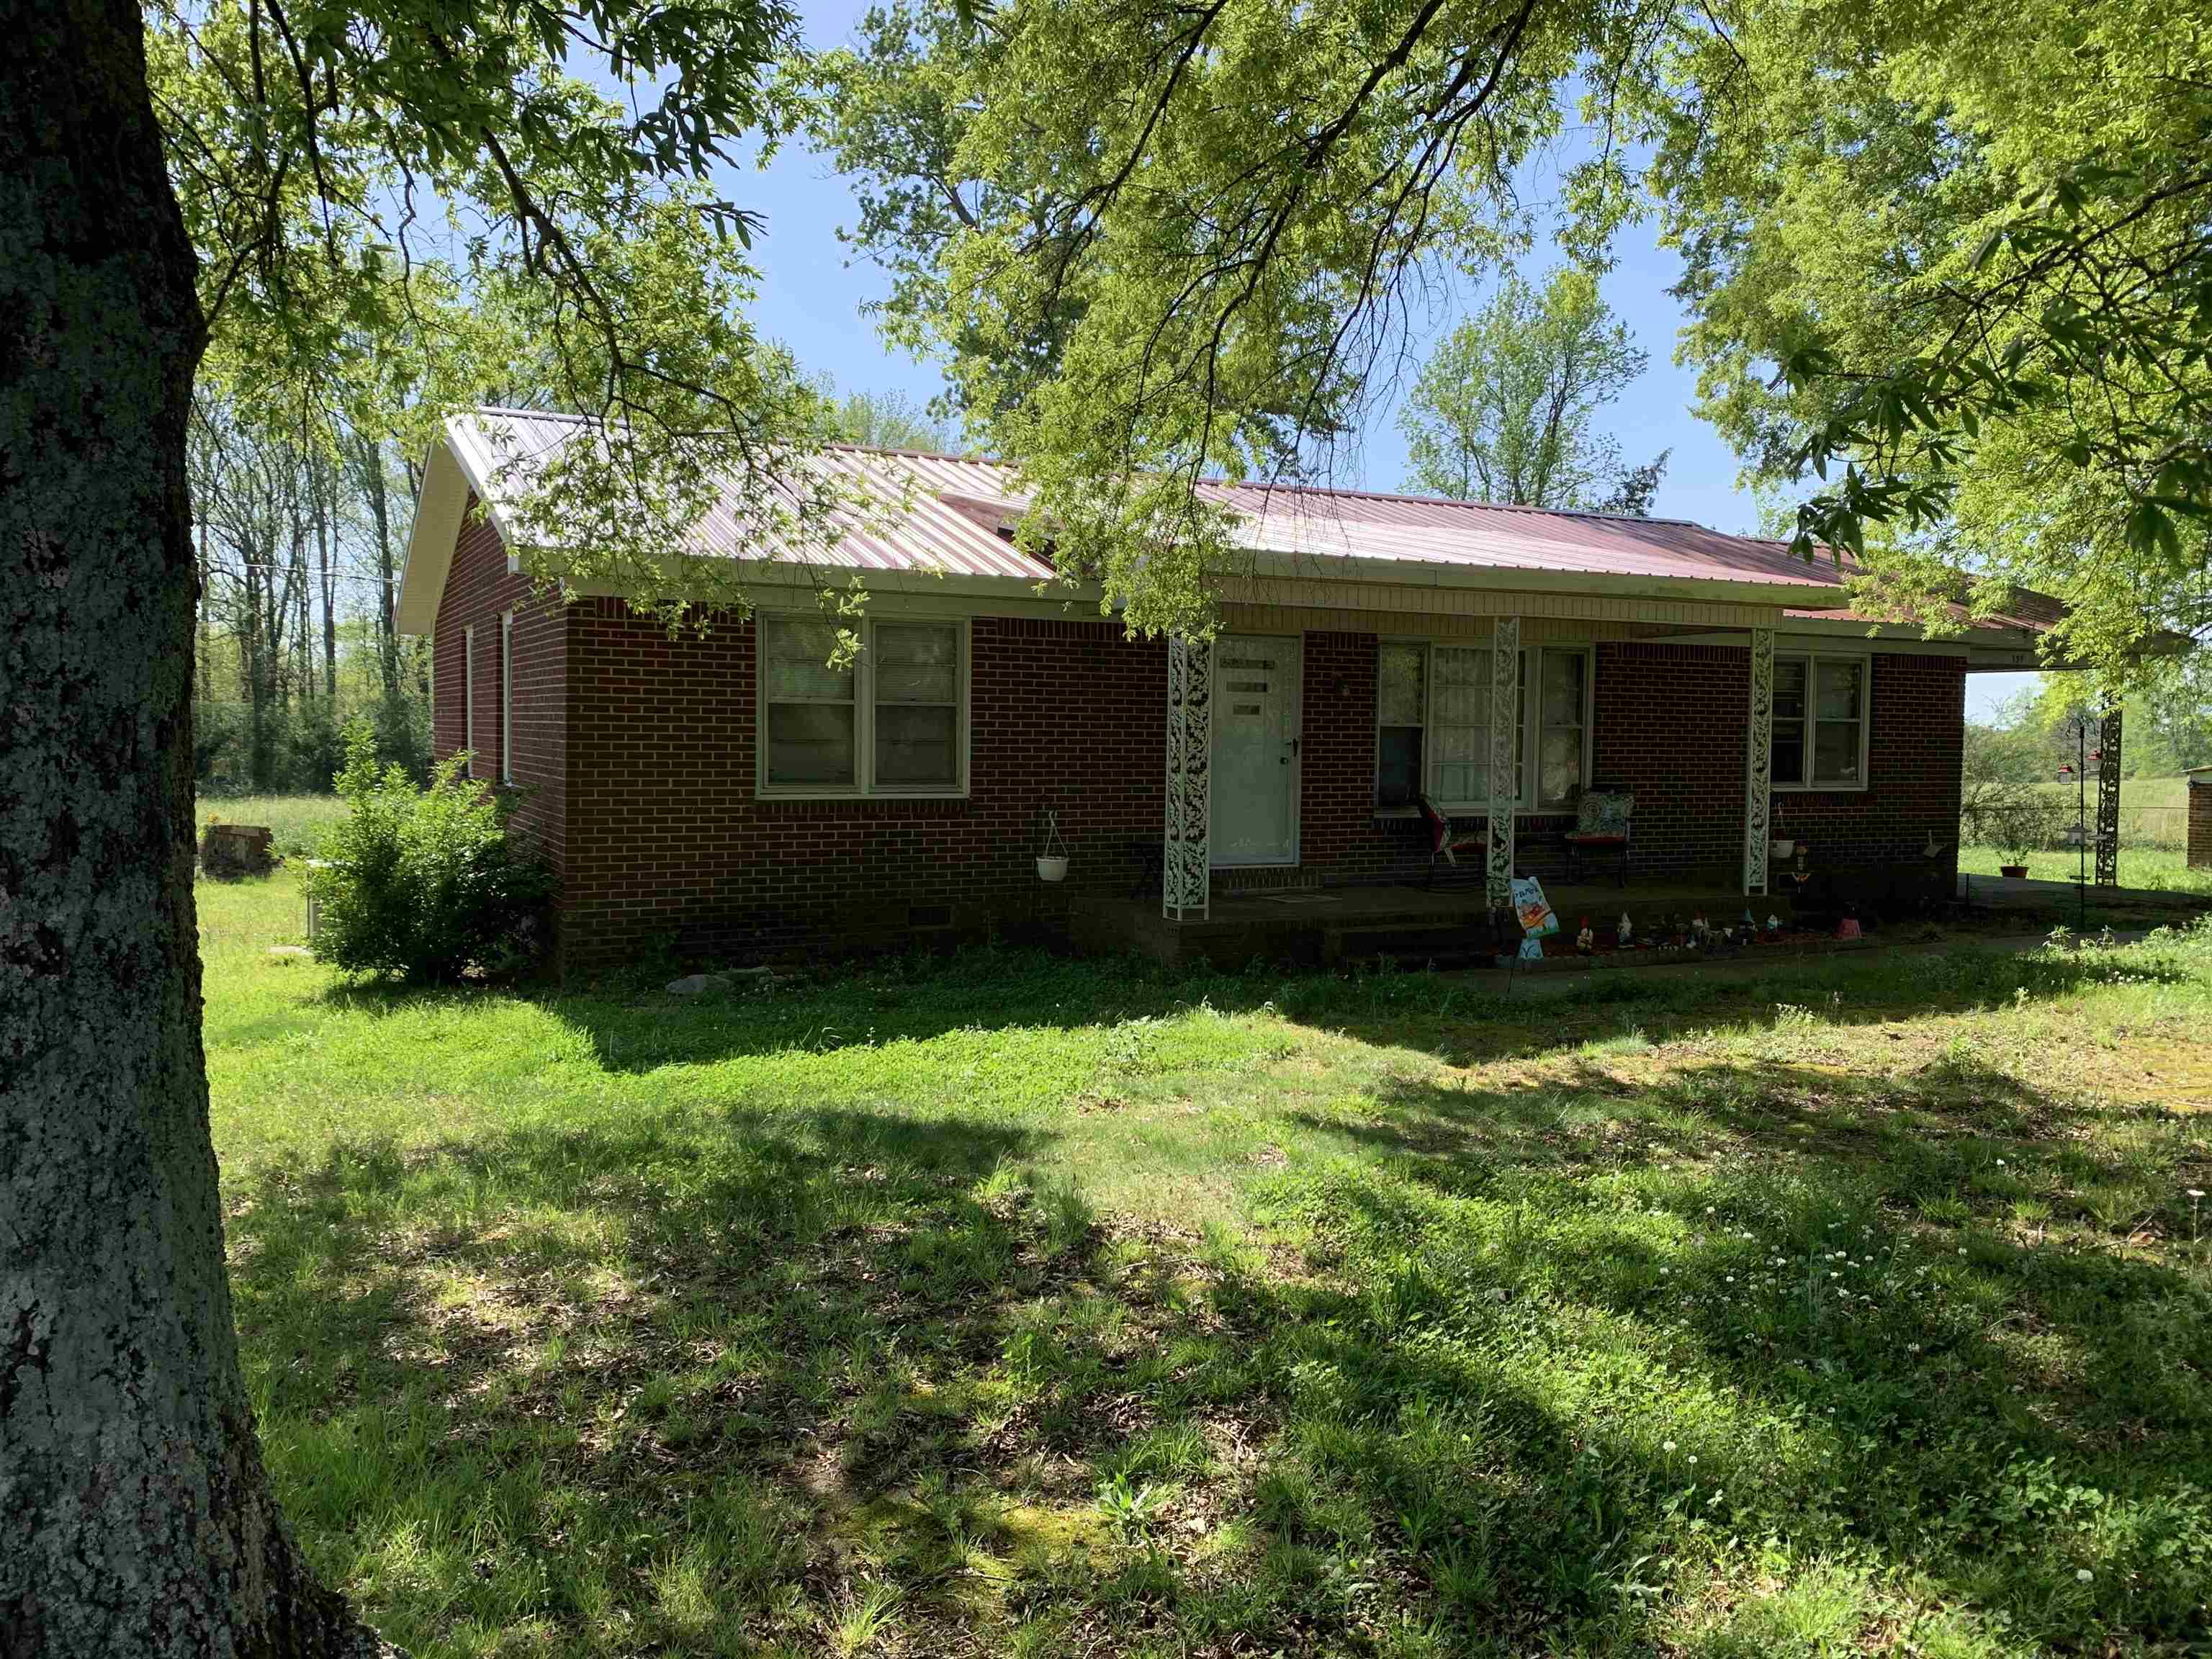 Charming brick home in the country side of Phil Campbell.  This little home is gorgeous and needs absolutely nothing.  Kept clean and really well taken care of.  Just the perfect place to settle down.